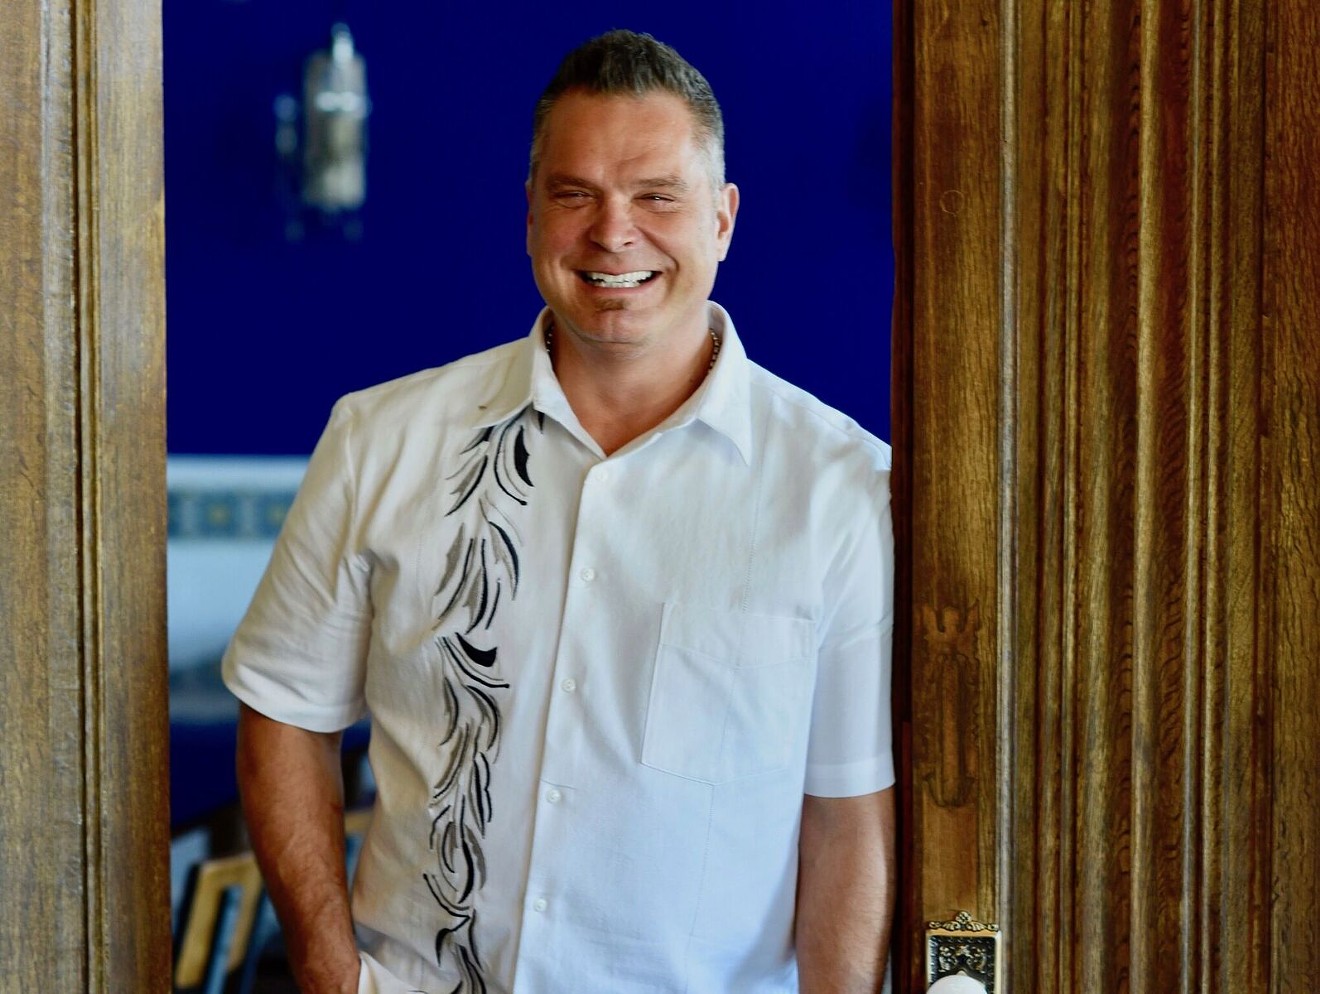 Ronnie Killen, a Pearland native, graduated top of his class at Le Cordon Bleu in London. He is the chef and restauranteur behind a growing empire of restaurants in the greater Houston area.